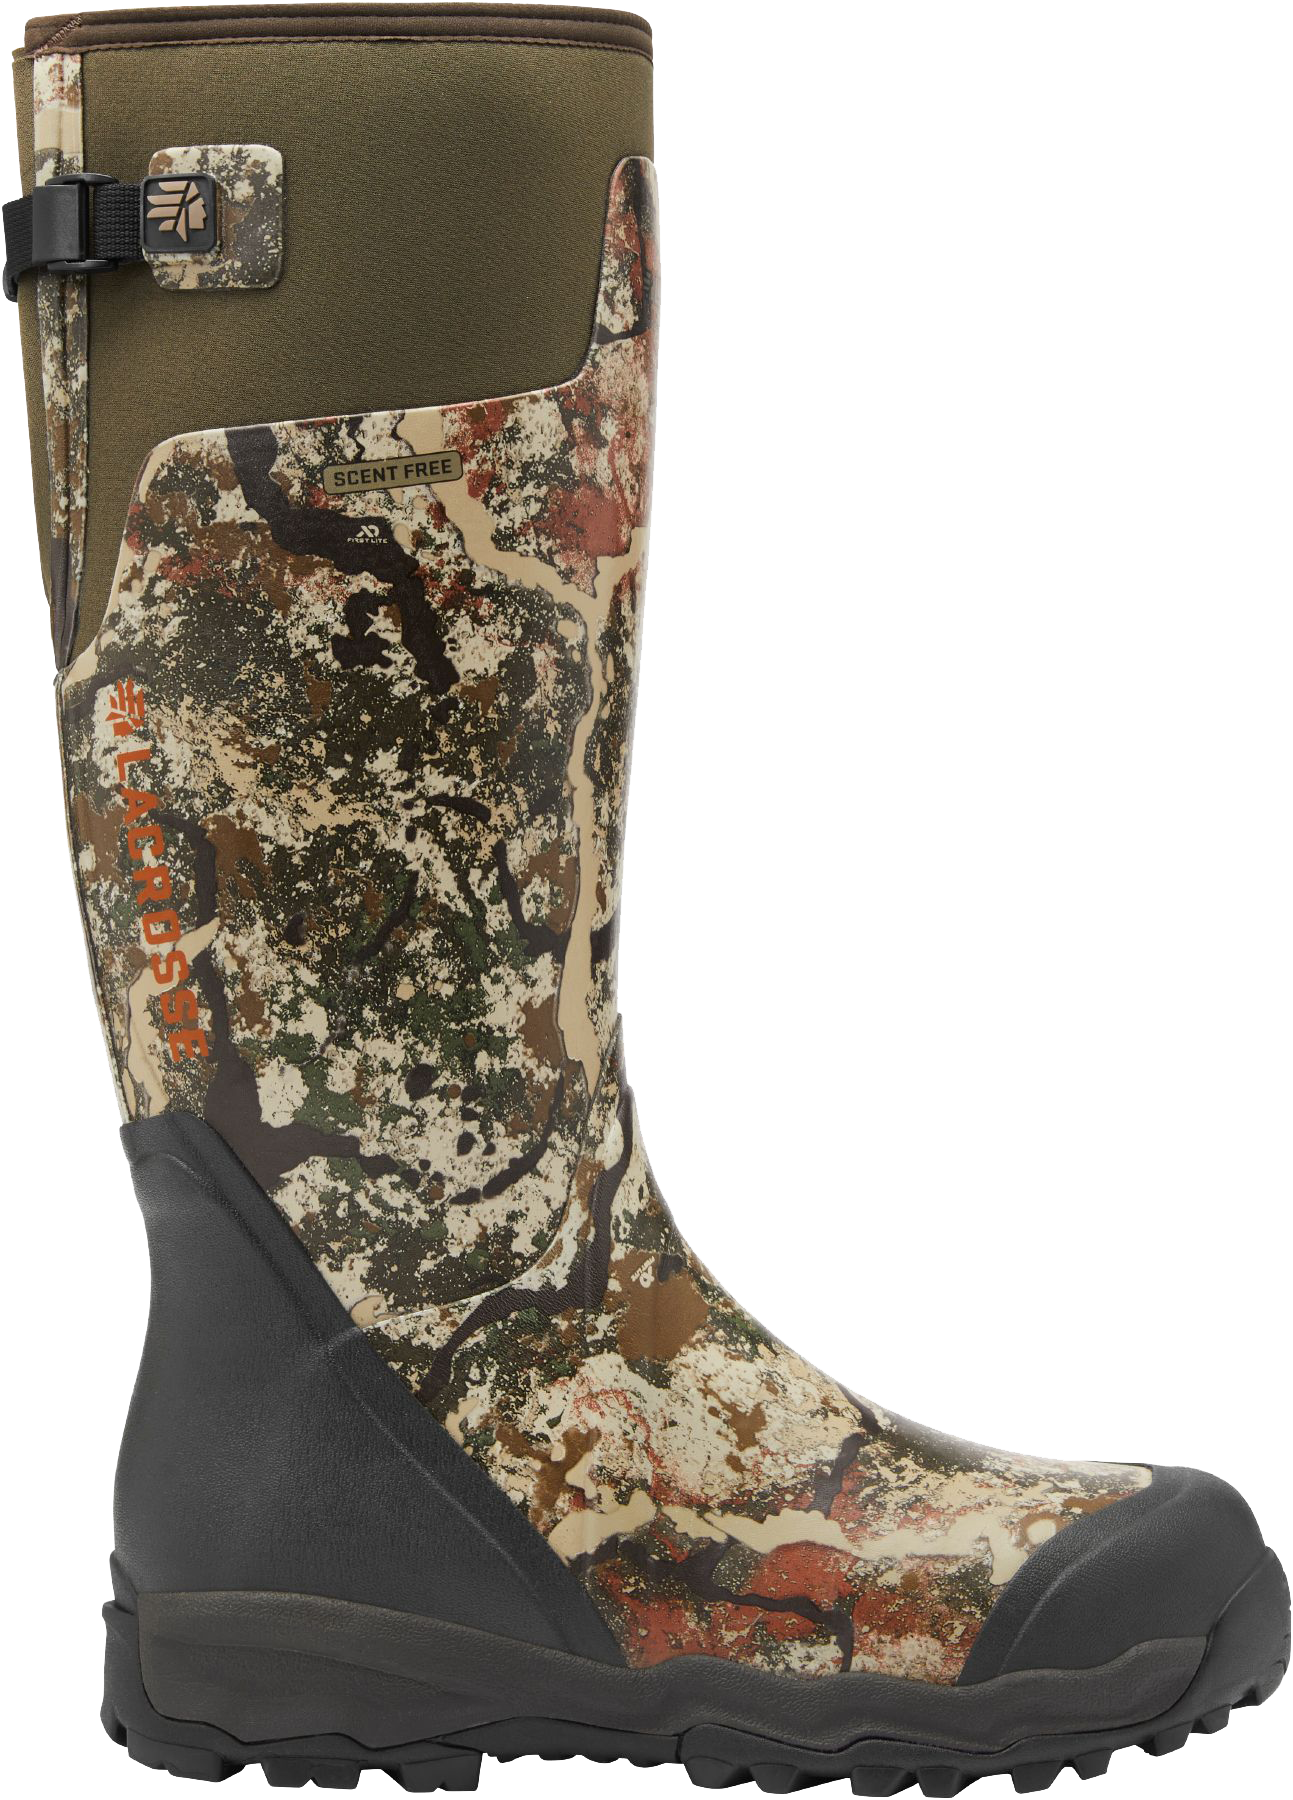 LaCrosse AlphaBurly Pro Hunting Boots for Men - First Lite Specter - 13M